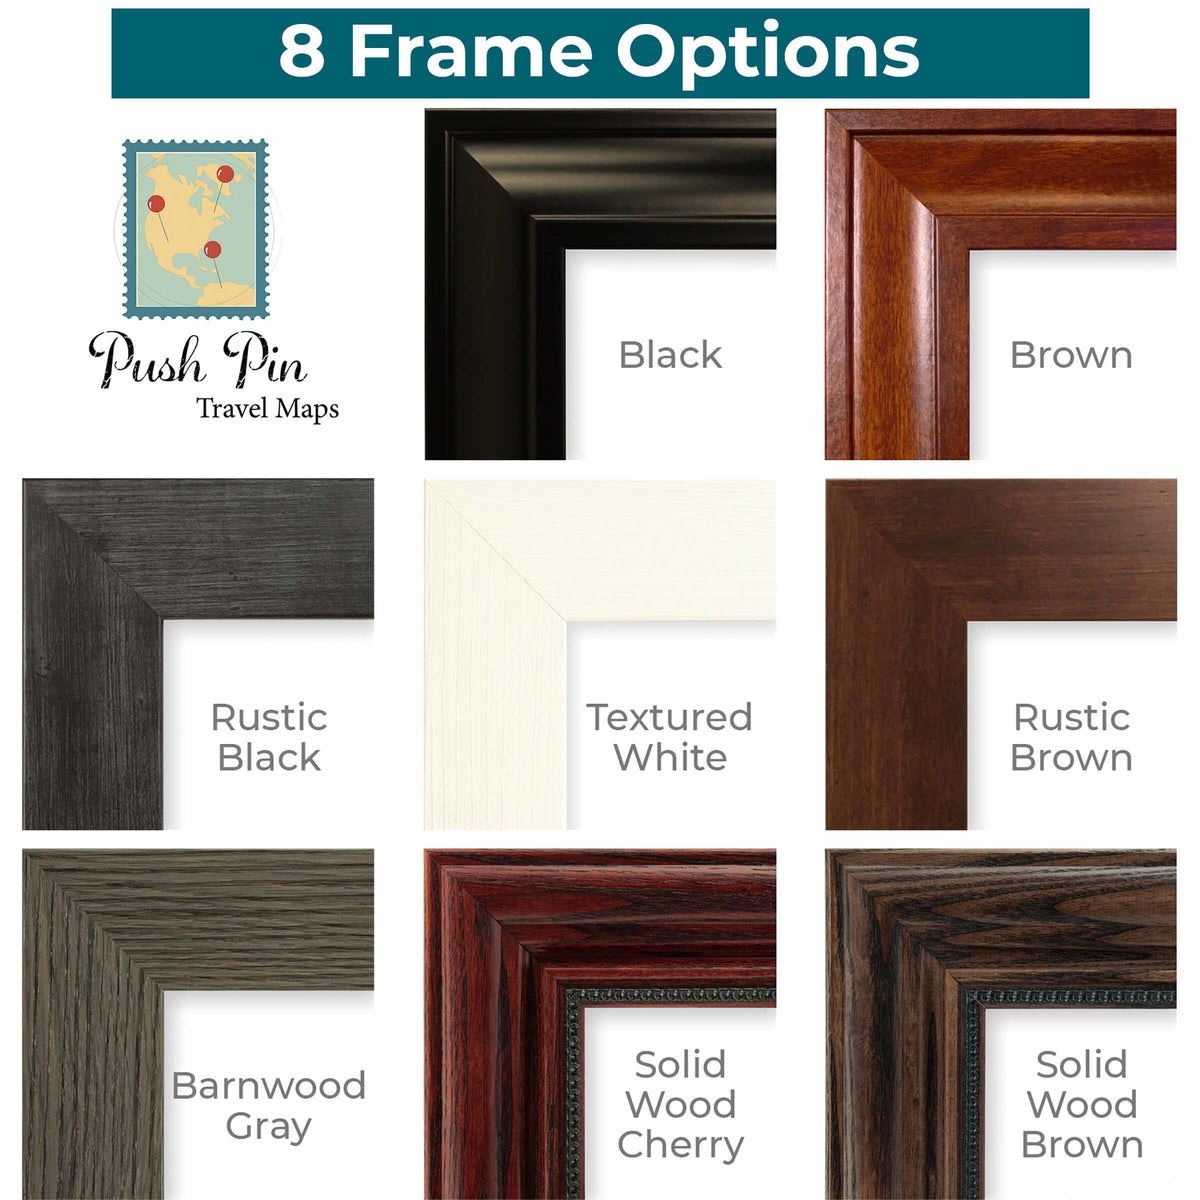 Frame Options for Contemporary World Map